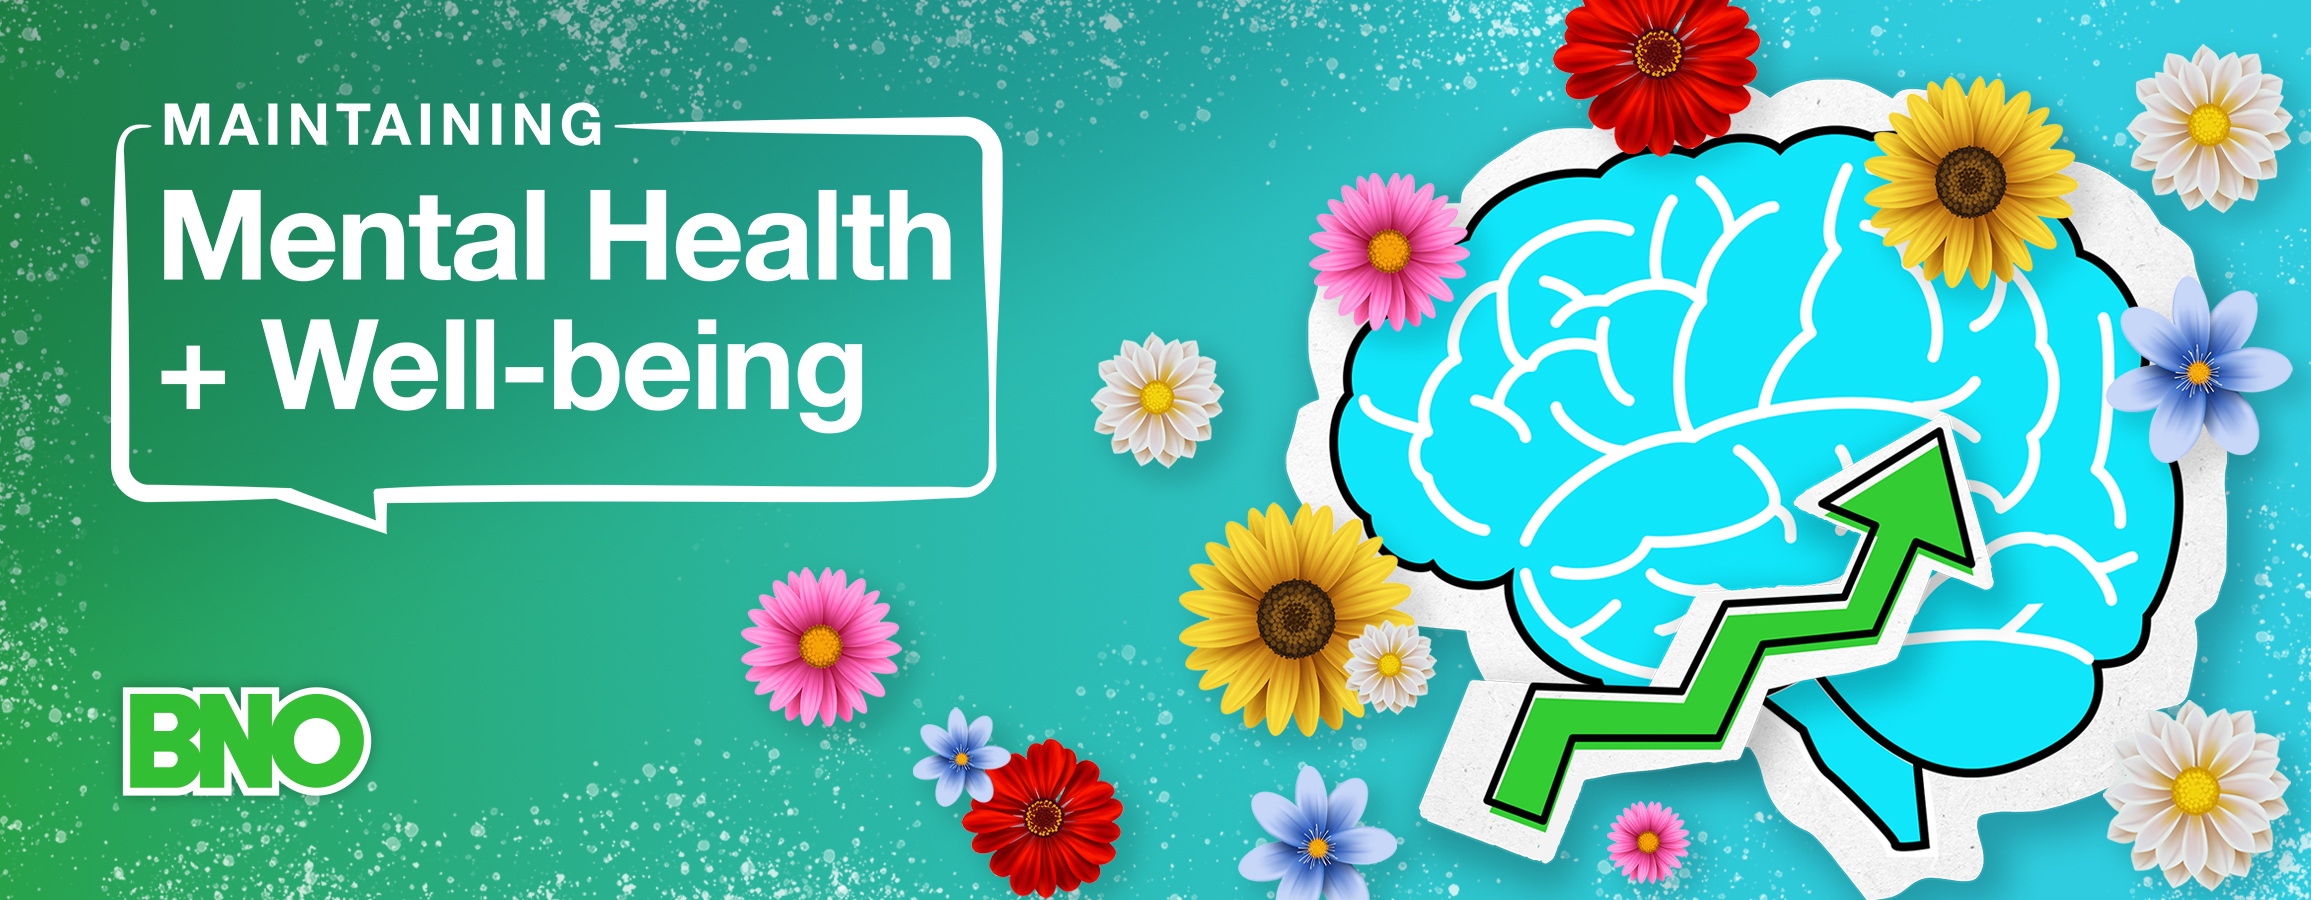 Blog post graphic about maintaining mental health and well-being.